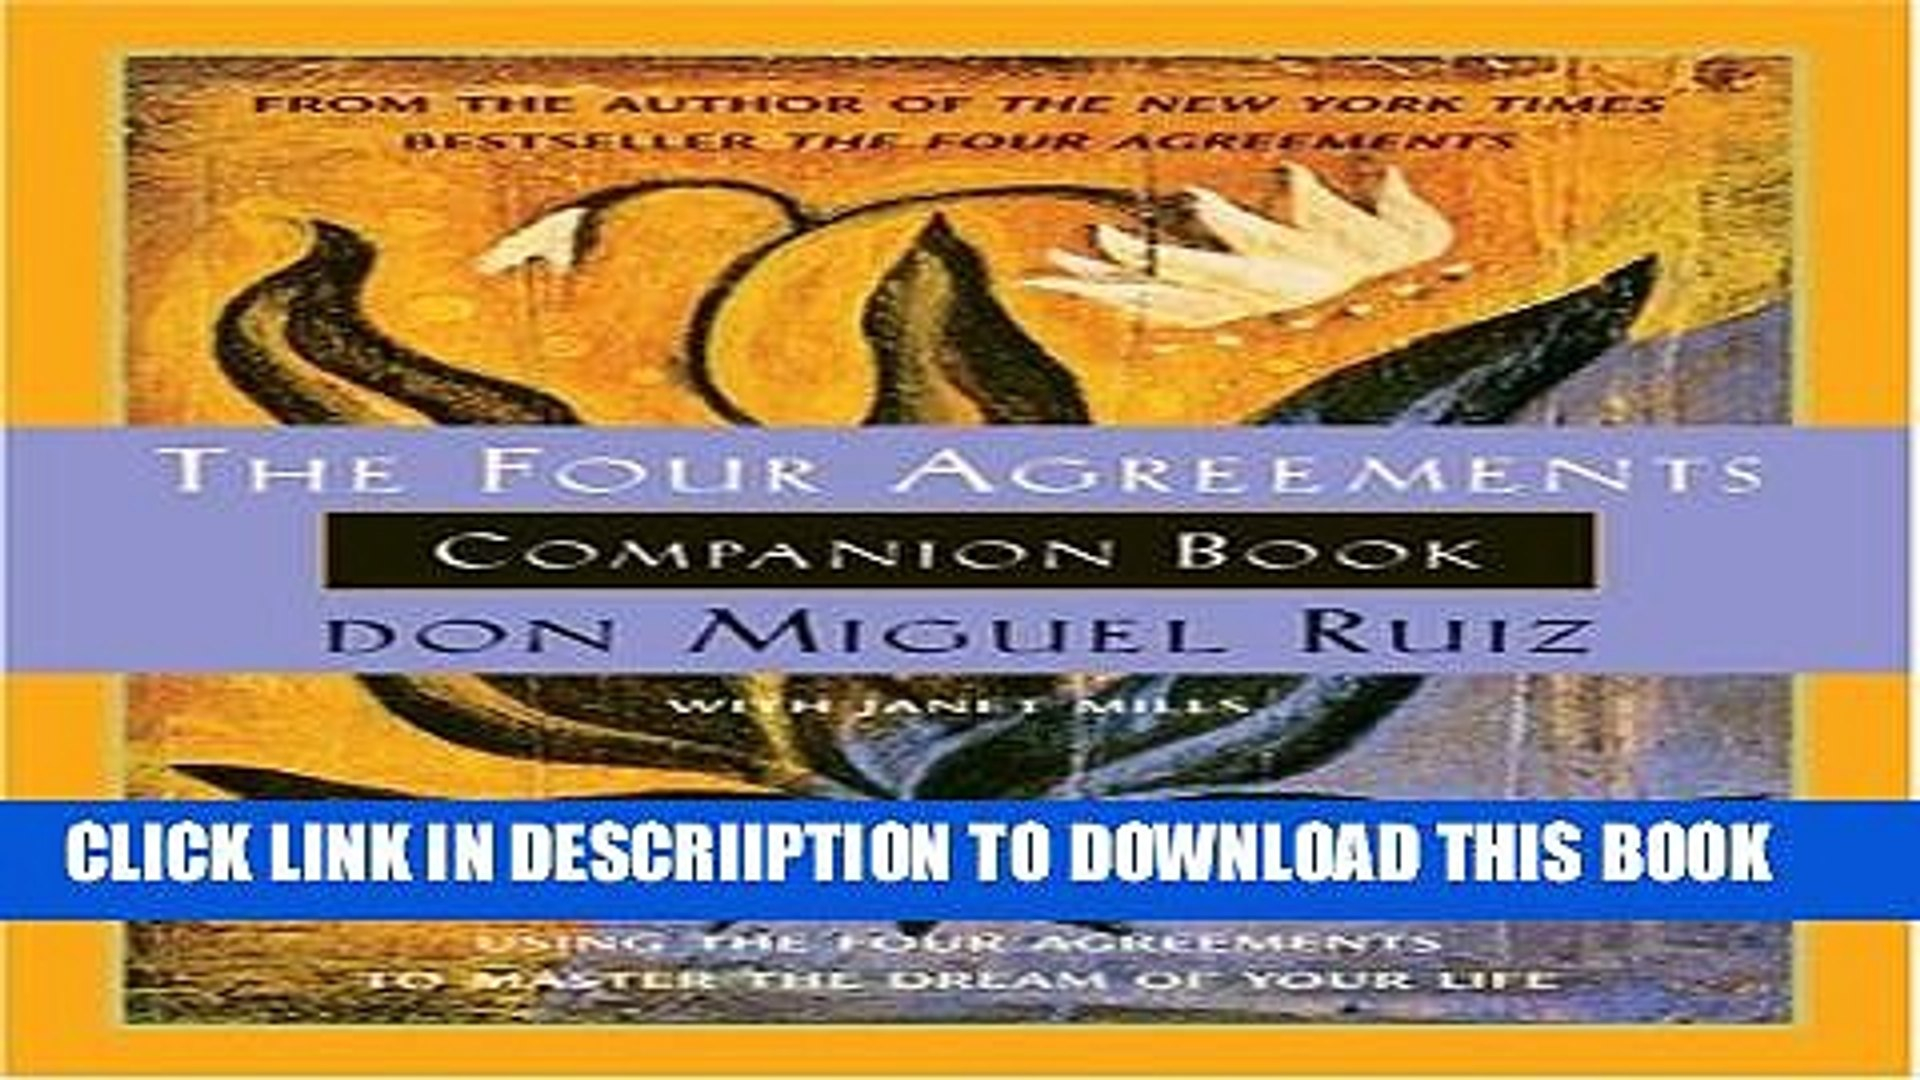 Four Agreements Book Free Download New The Four Agreements Companion Book Using The Four Agreements To Master The Dream Of Your